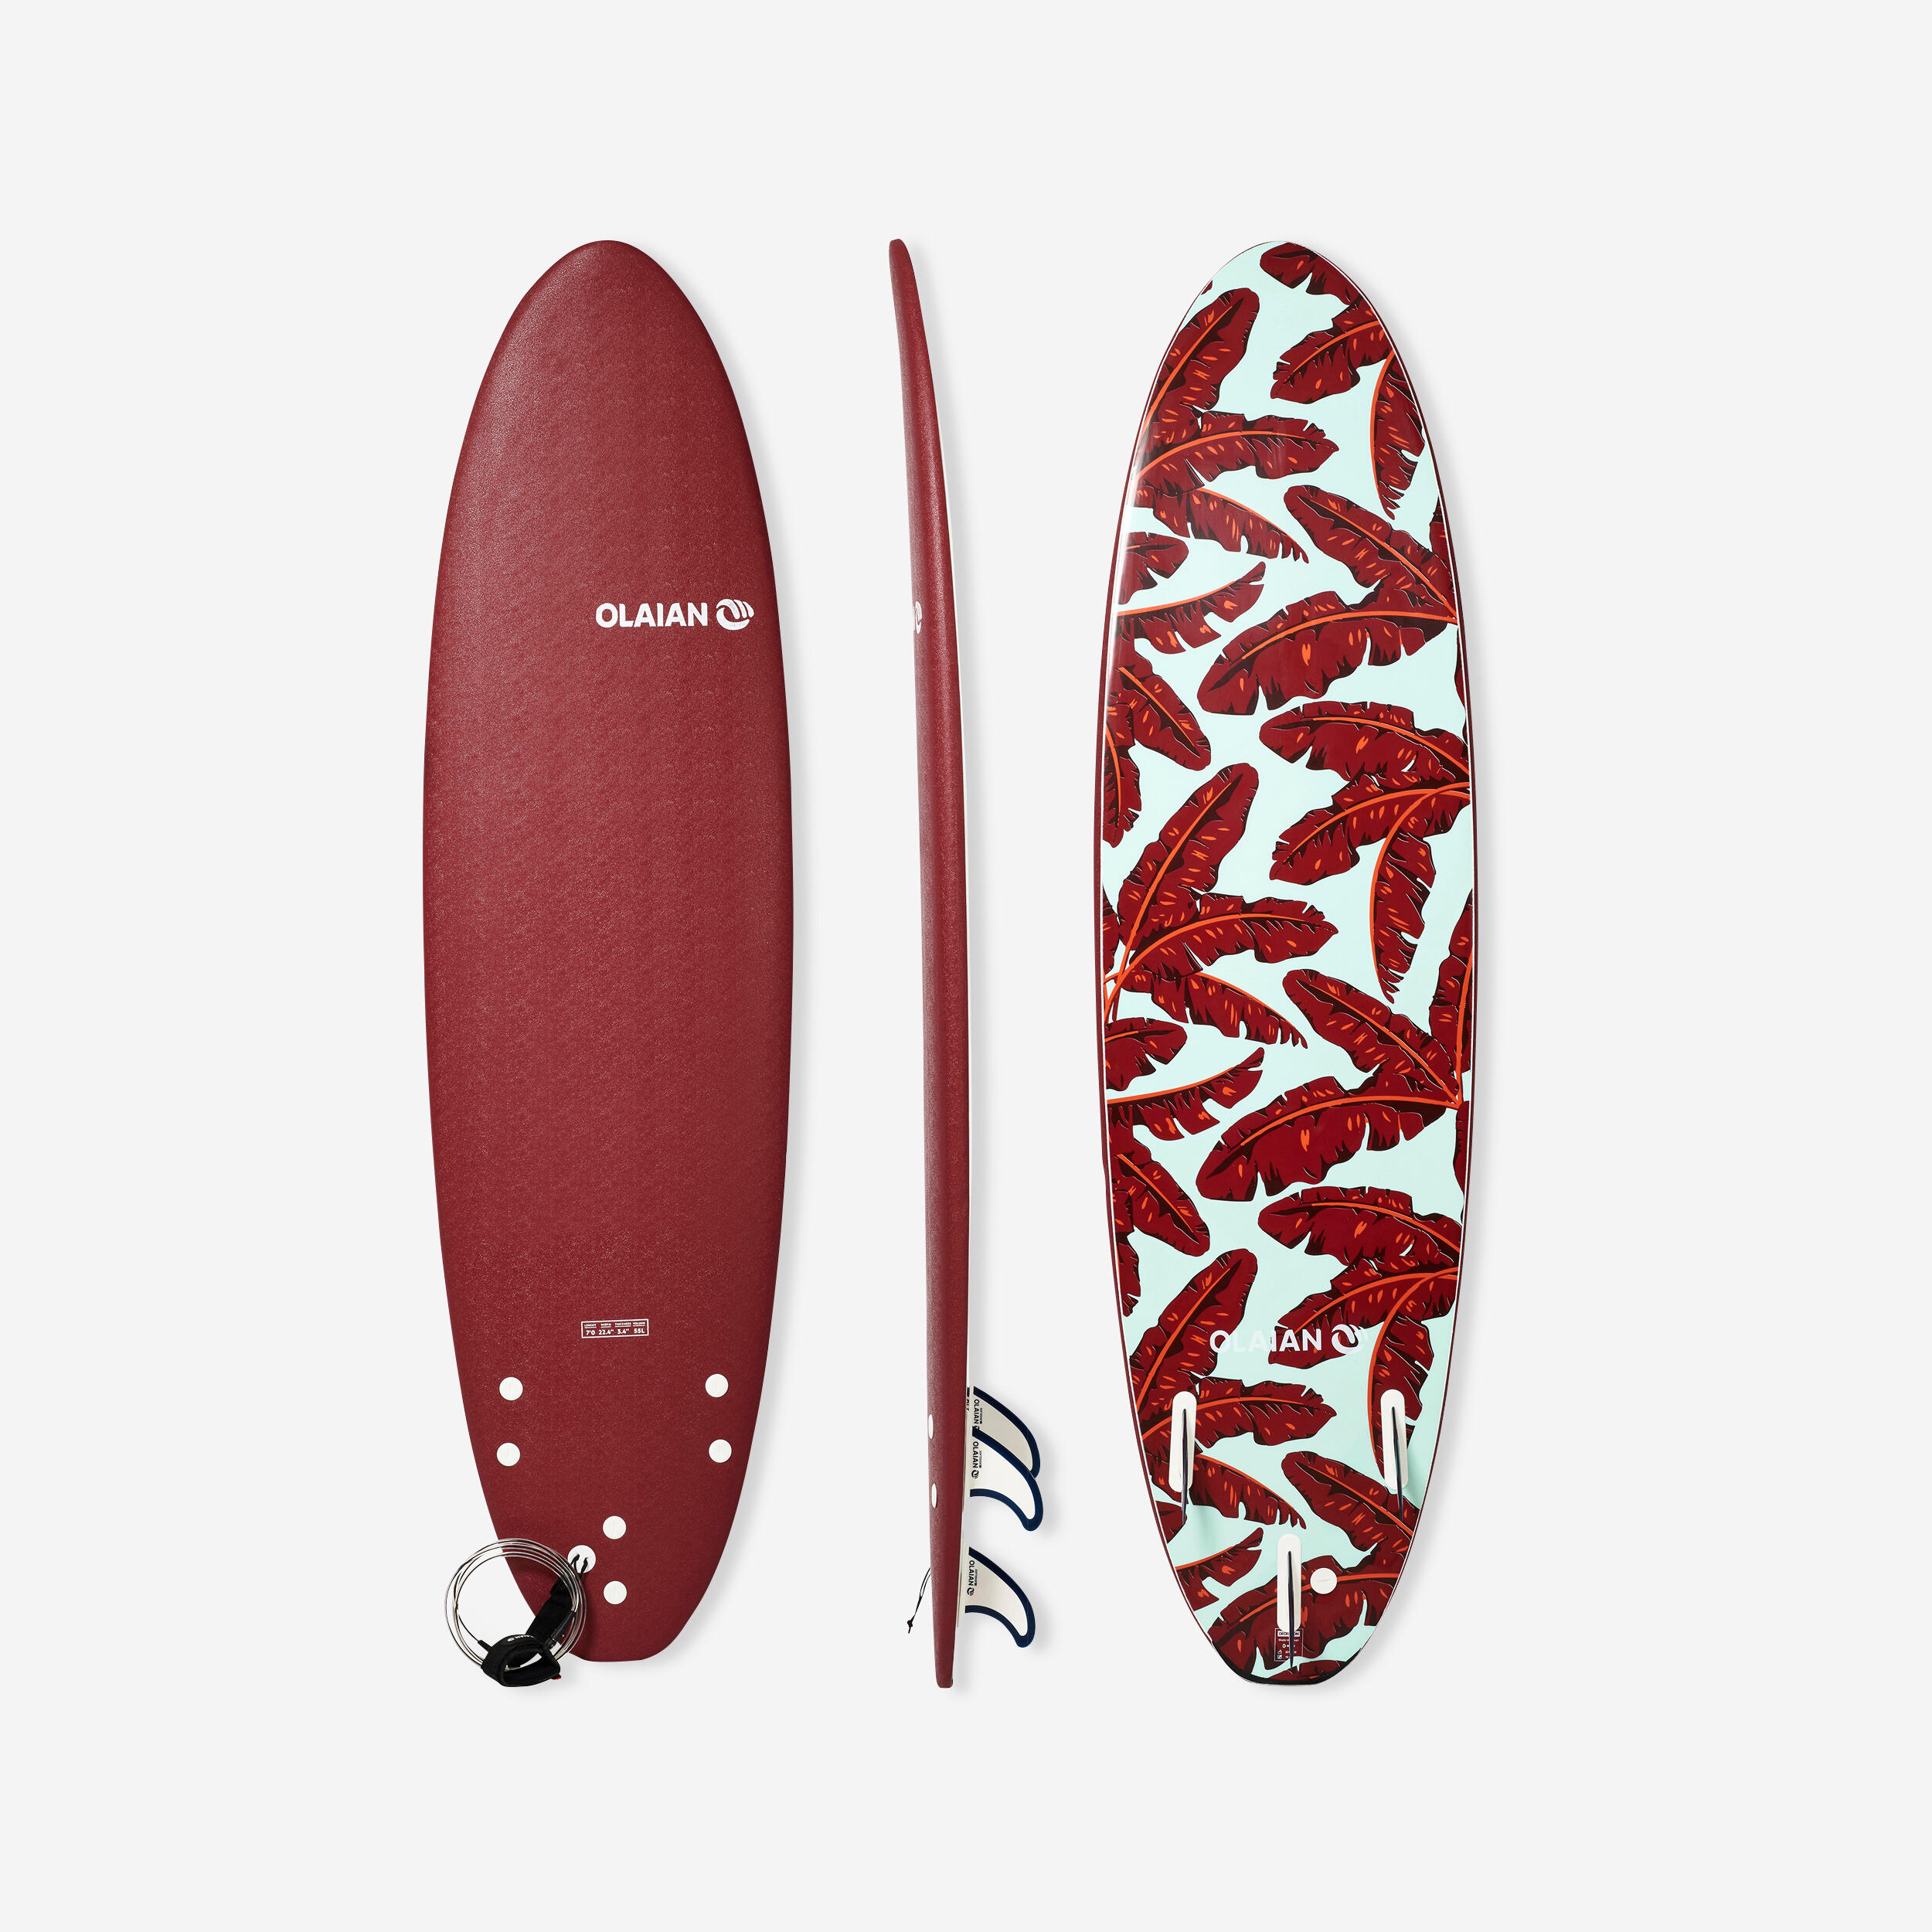 Image of 7' Foam Surfboard - 500Includes 1 leash and 3 fins.